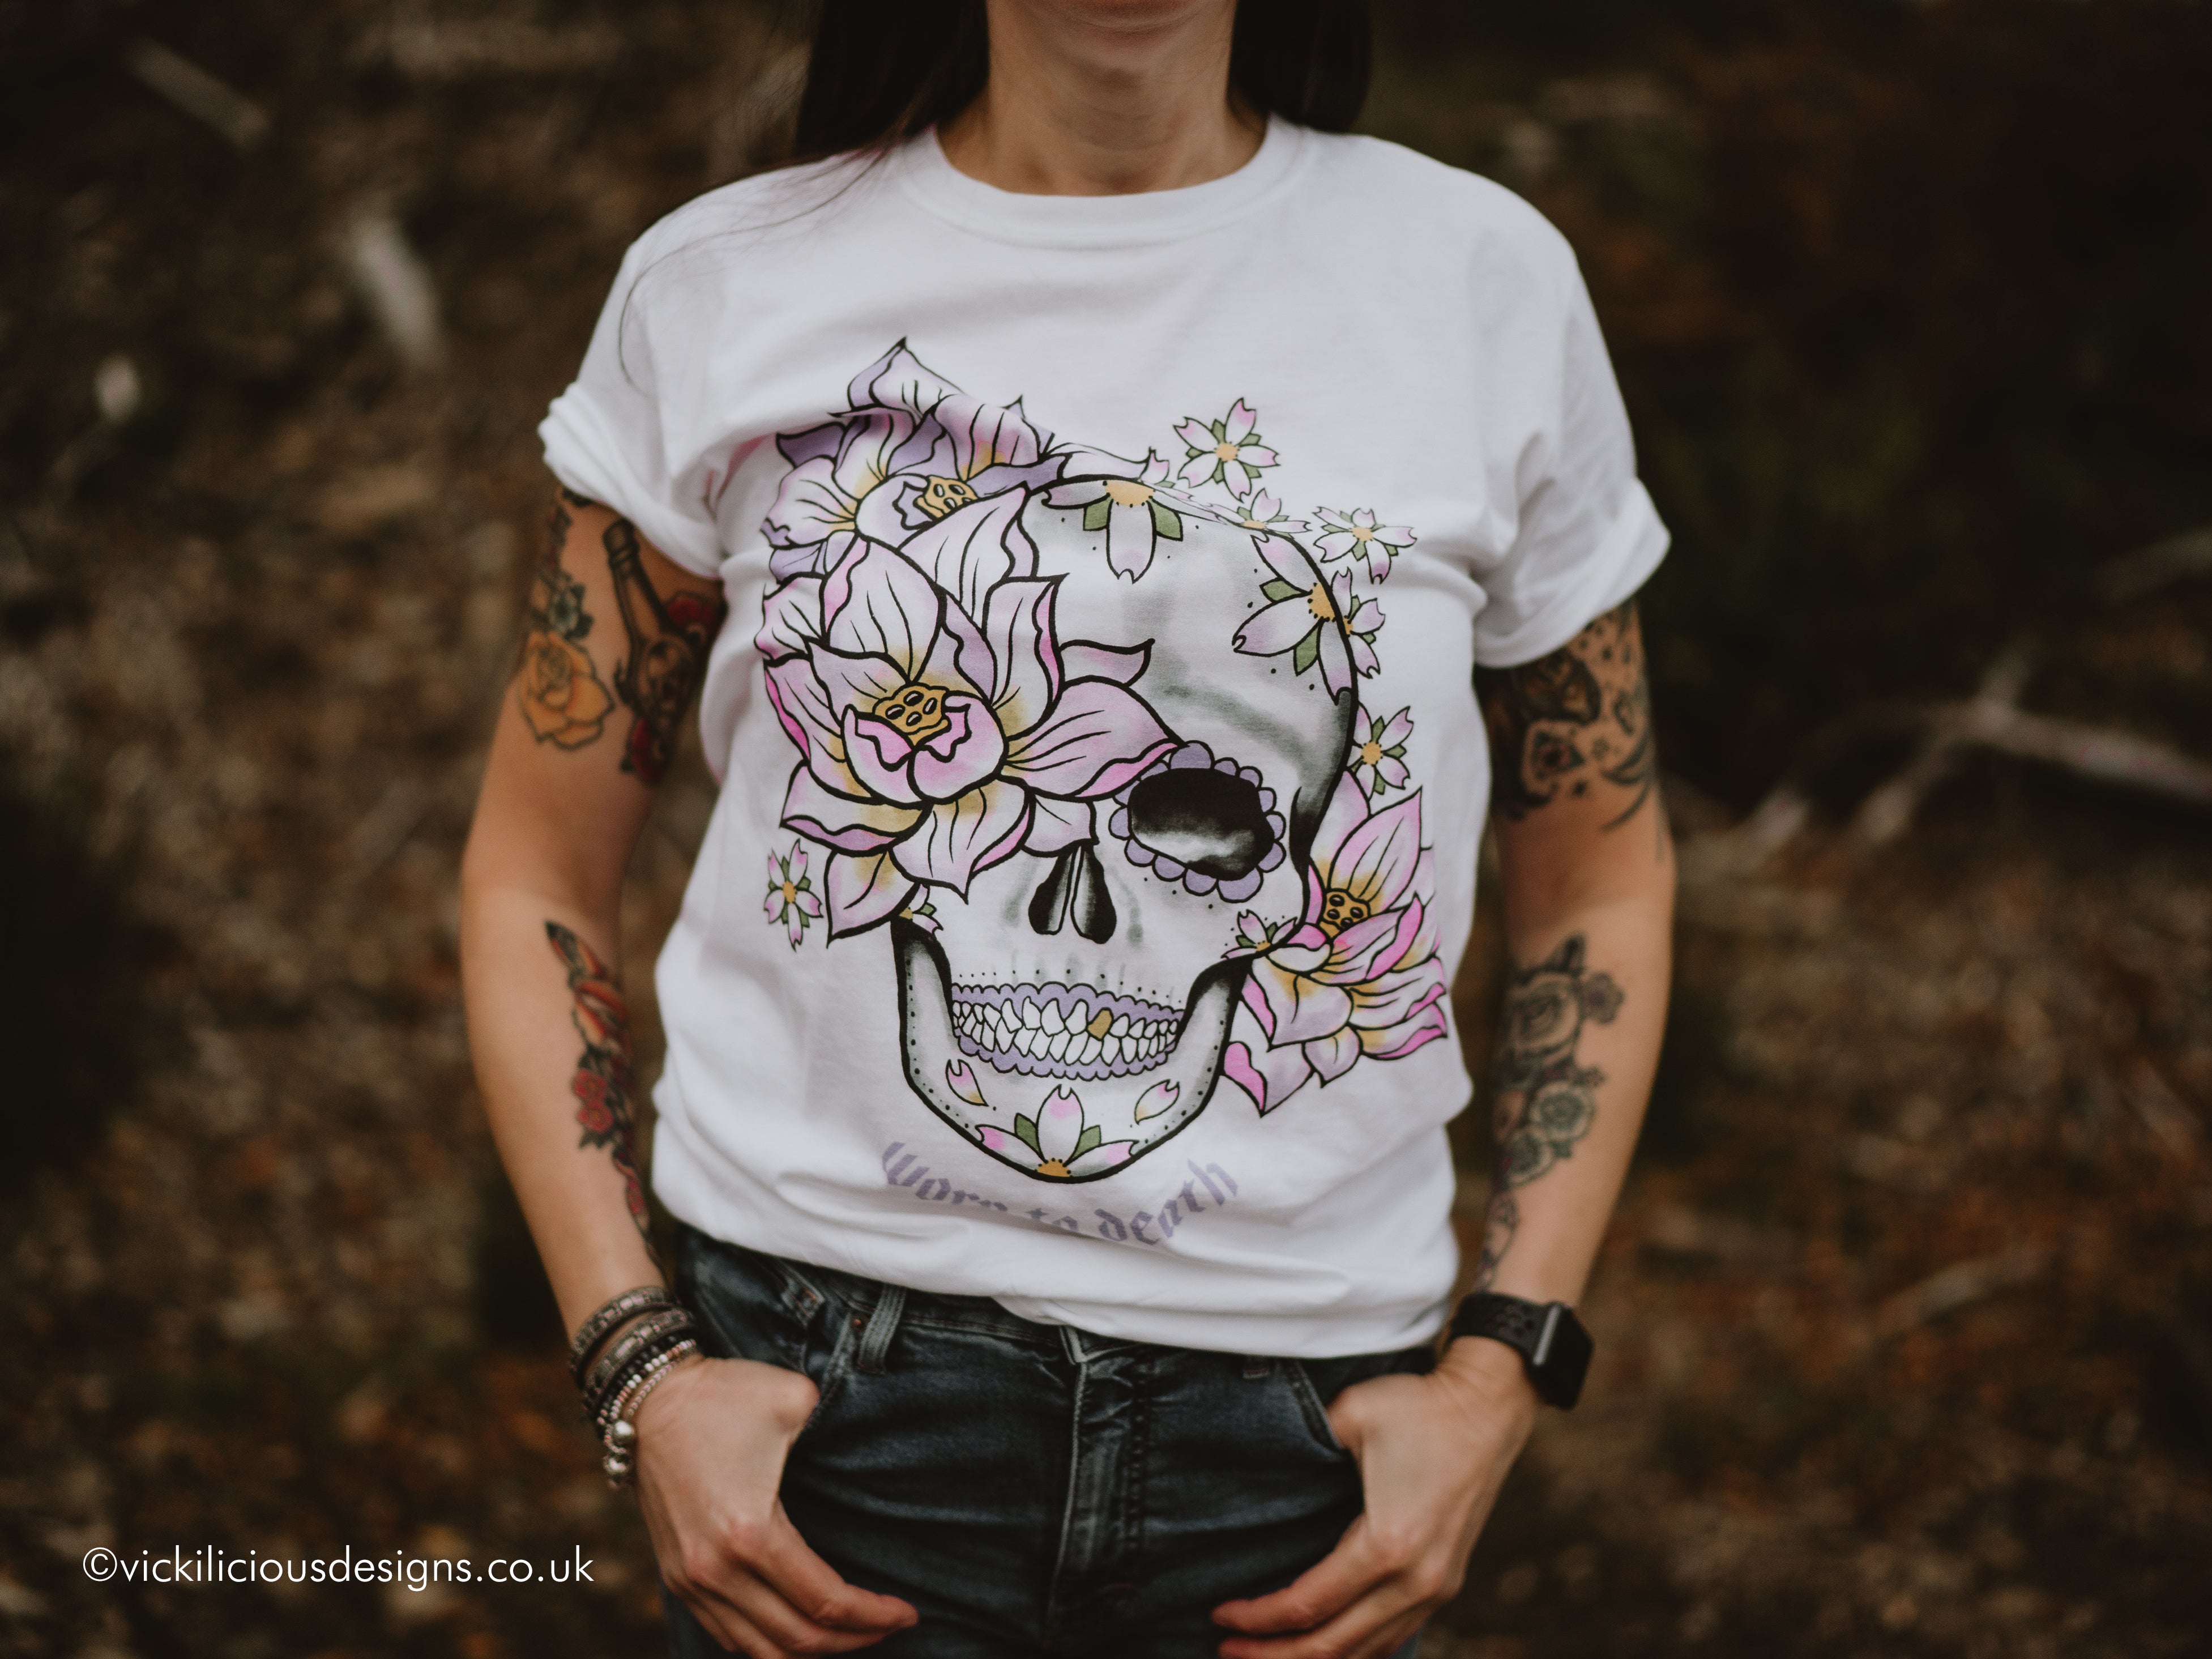 Kill Romeo Apparel  Tattoo inspired premium clothing from Athens